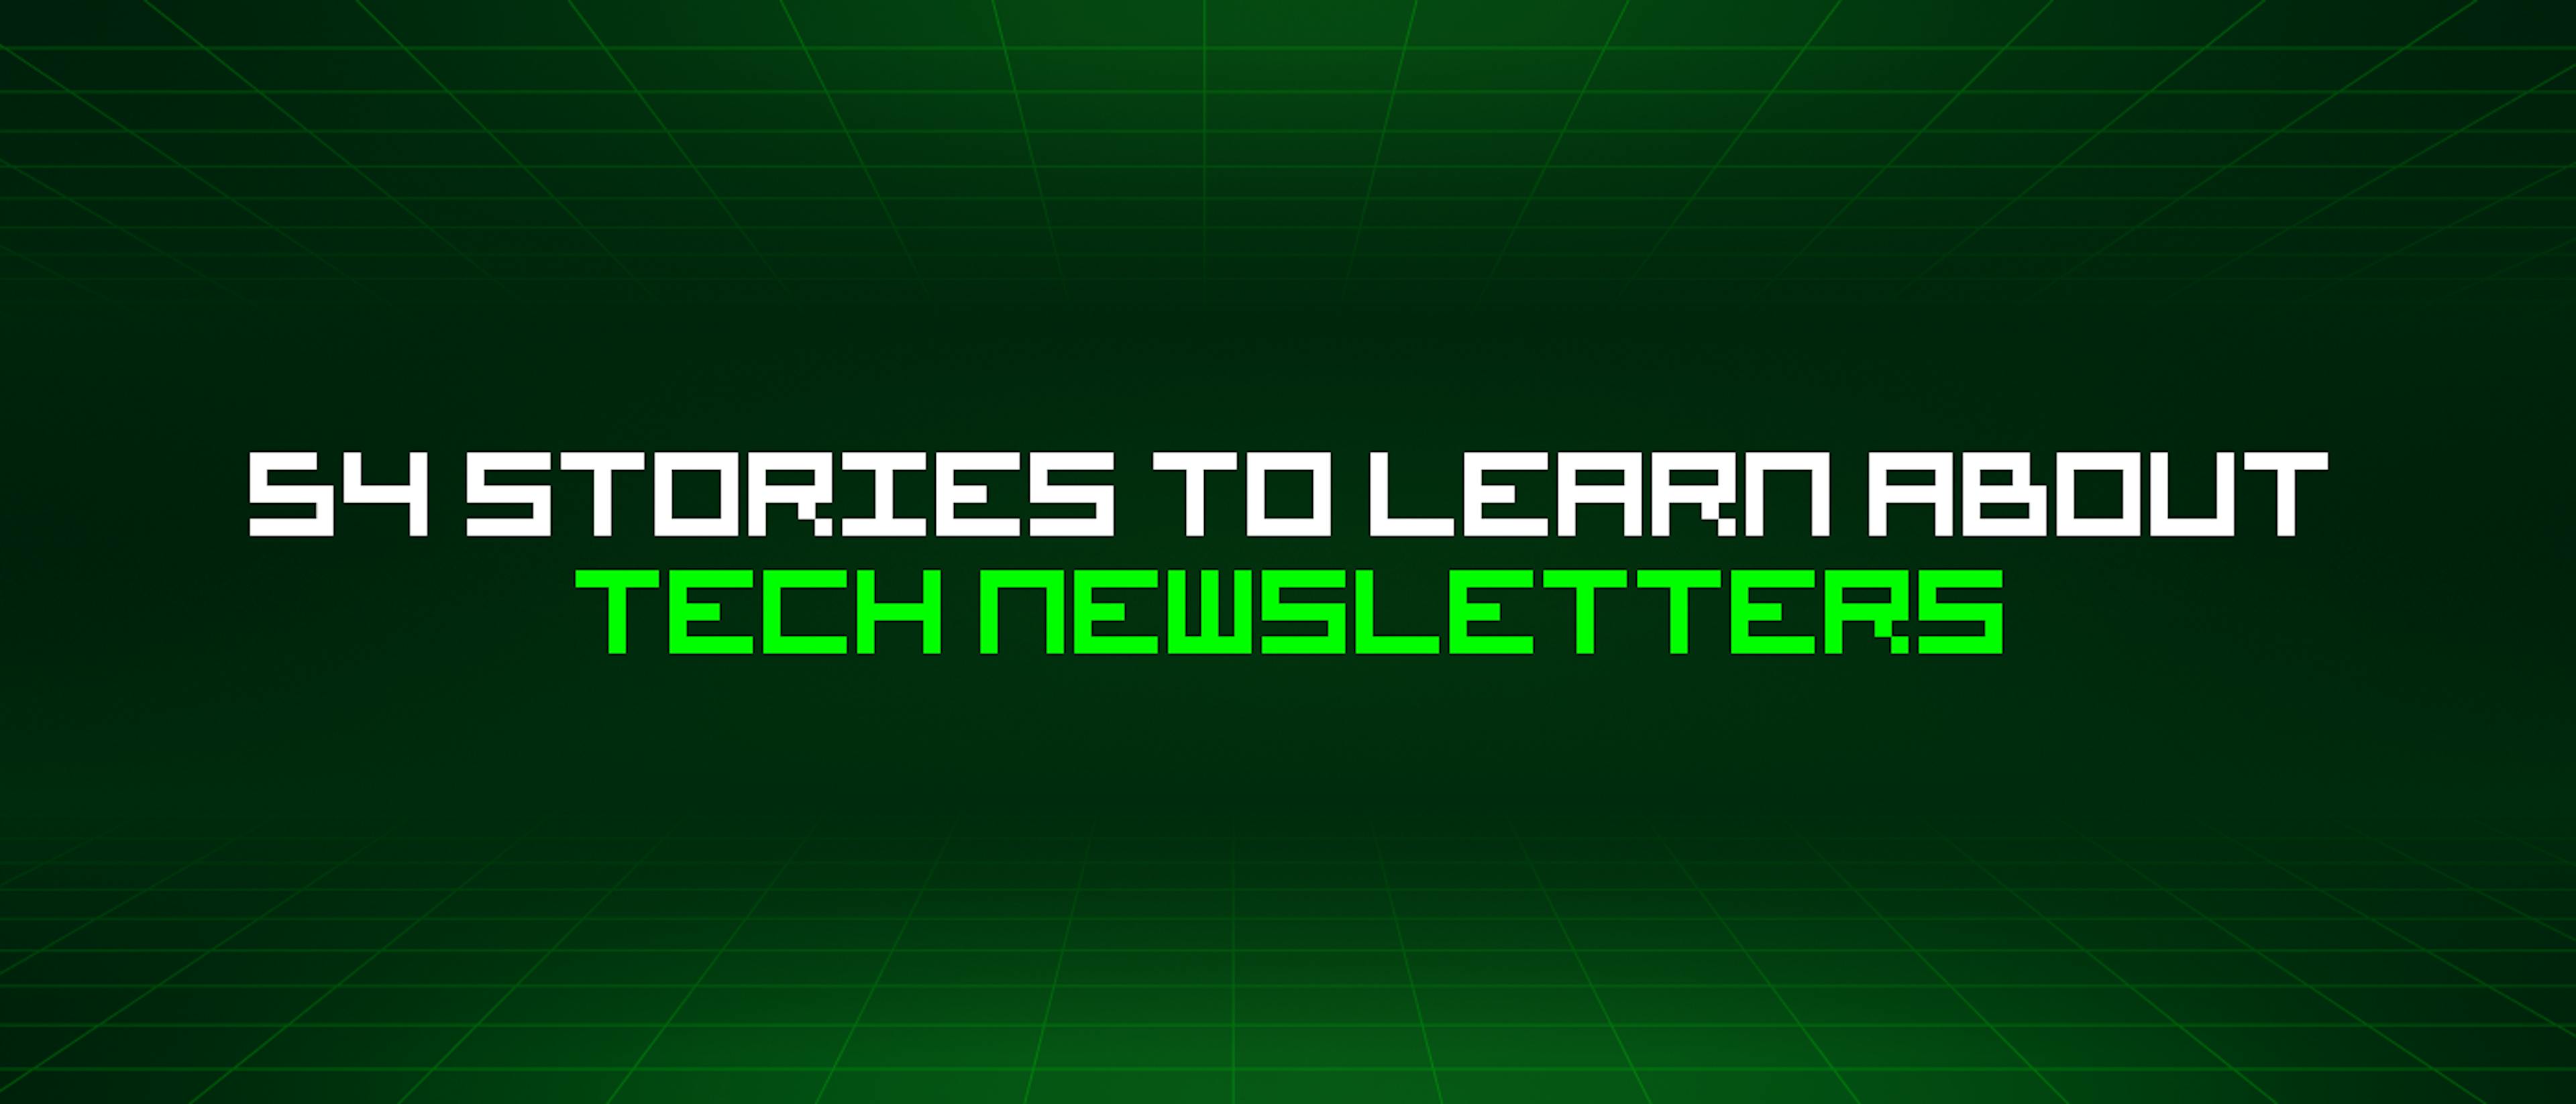 featured image - 54 Stories To Learn About Tech Newsletters